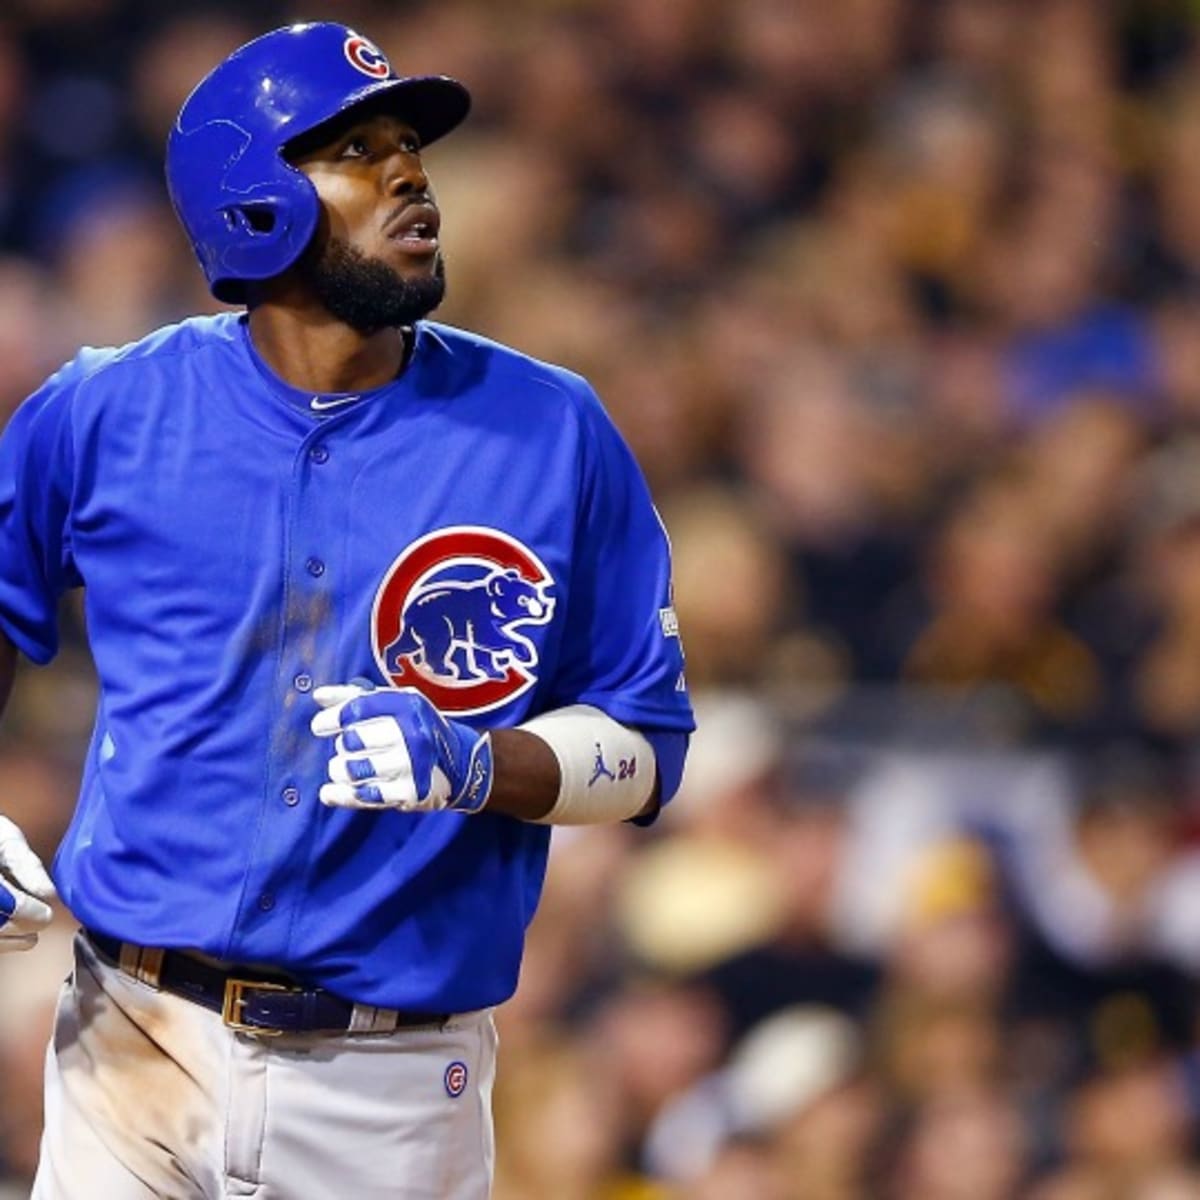 Bulked-up Dexter Fowler is center of attention for Rockies – The